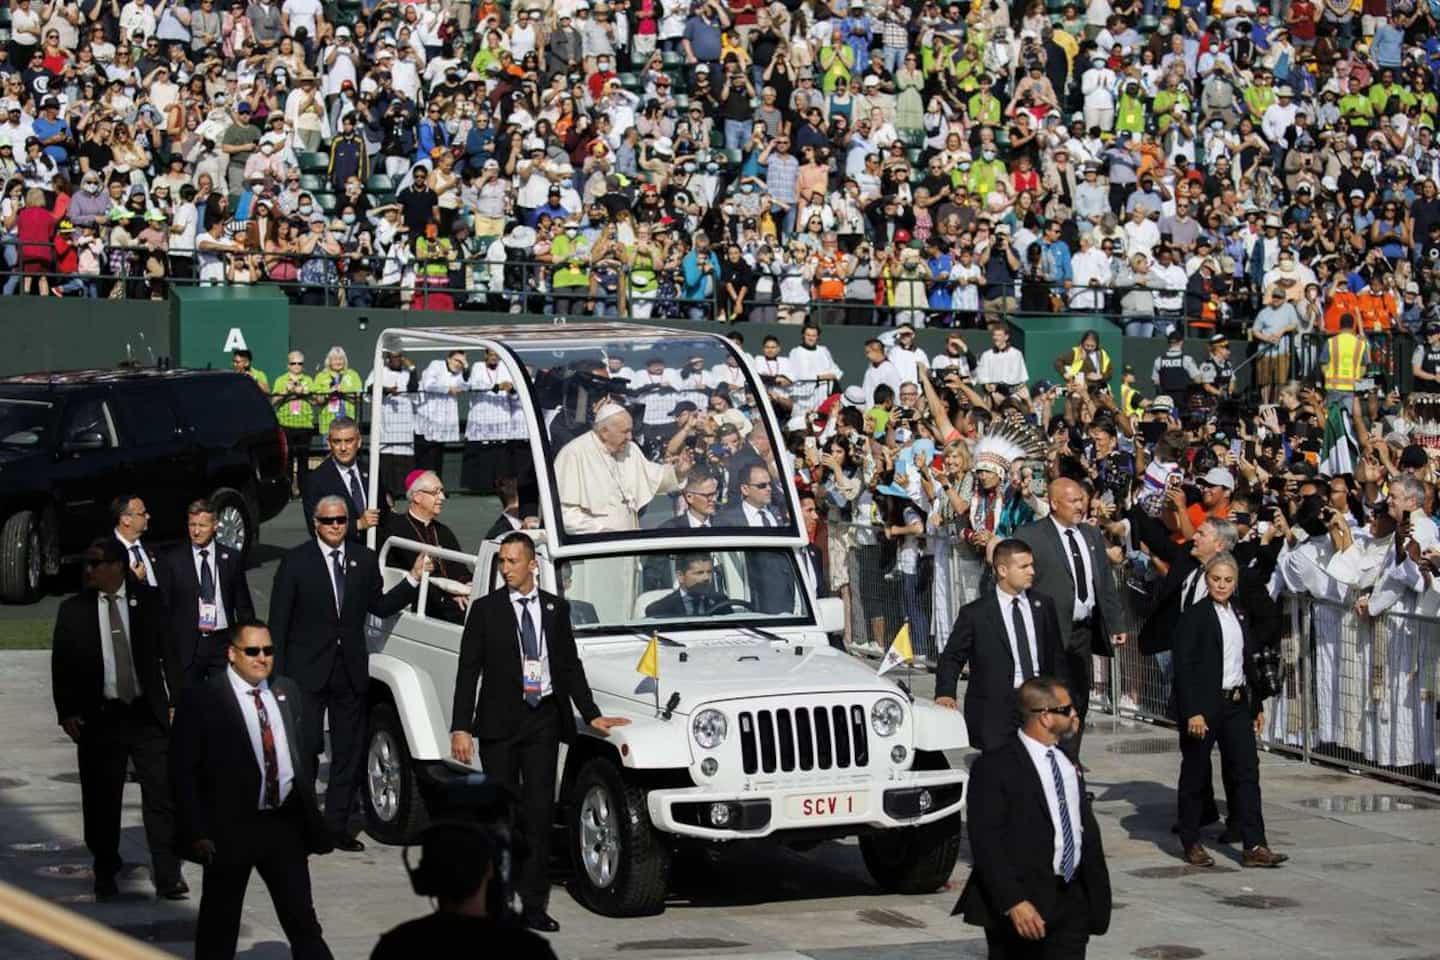 “Mission accomplished” for the pope, according to experts